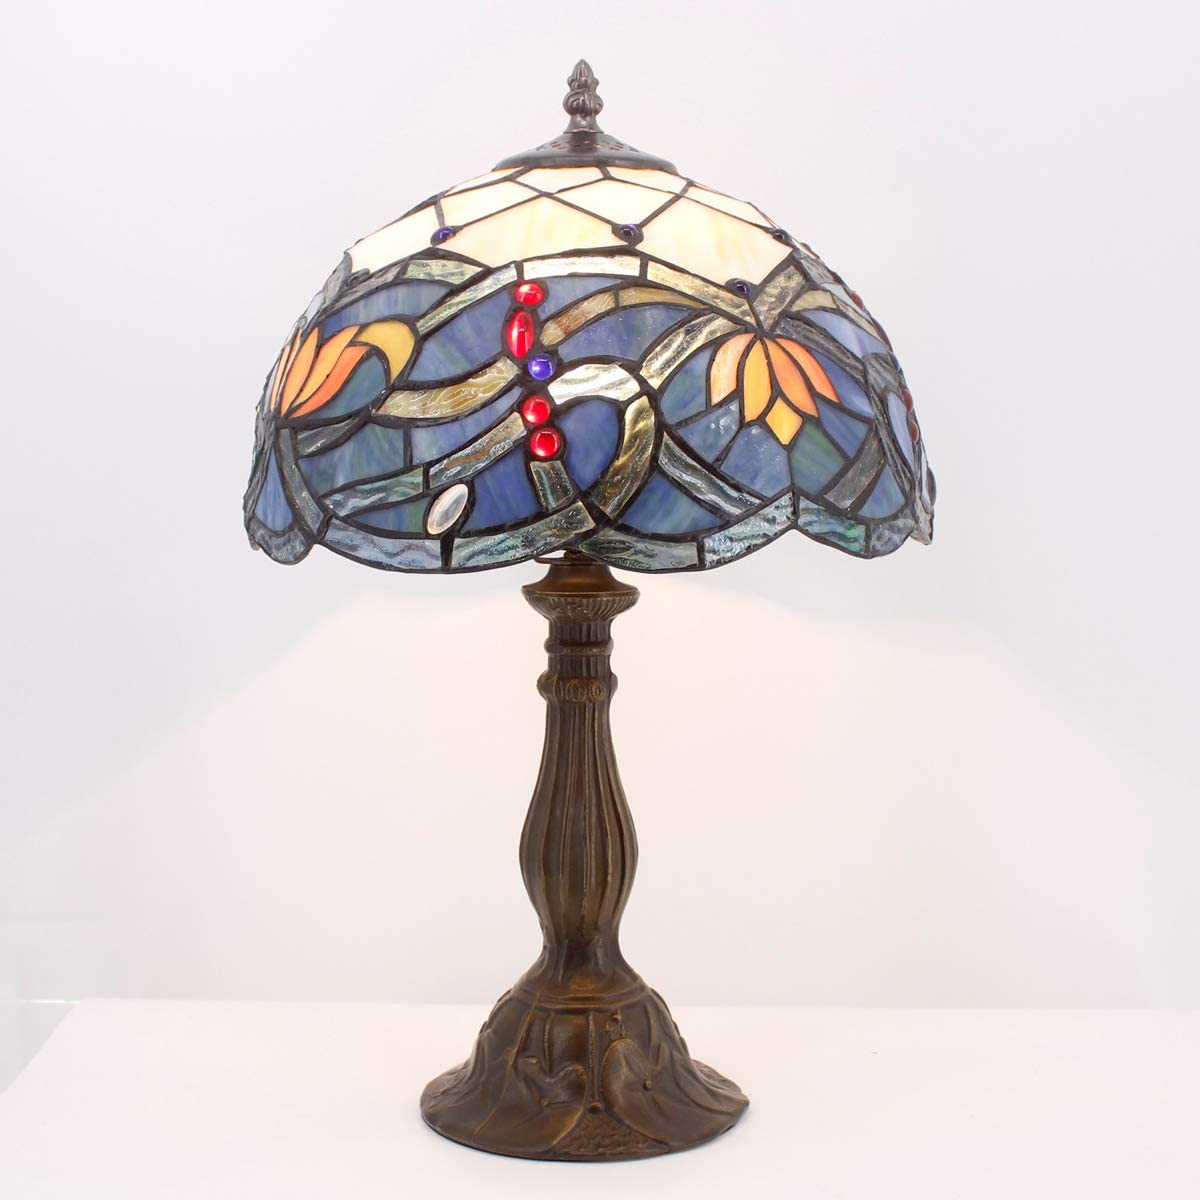 SHADY  Table Lamp Stained Glass Bedside Lamp Blue Lotus Desk Reading Light 12X12X18 Inches Decor Bedroom Living Room Home Office S220 Series